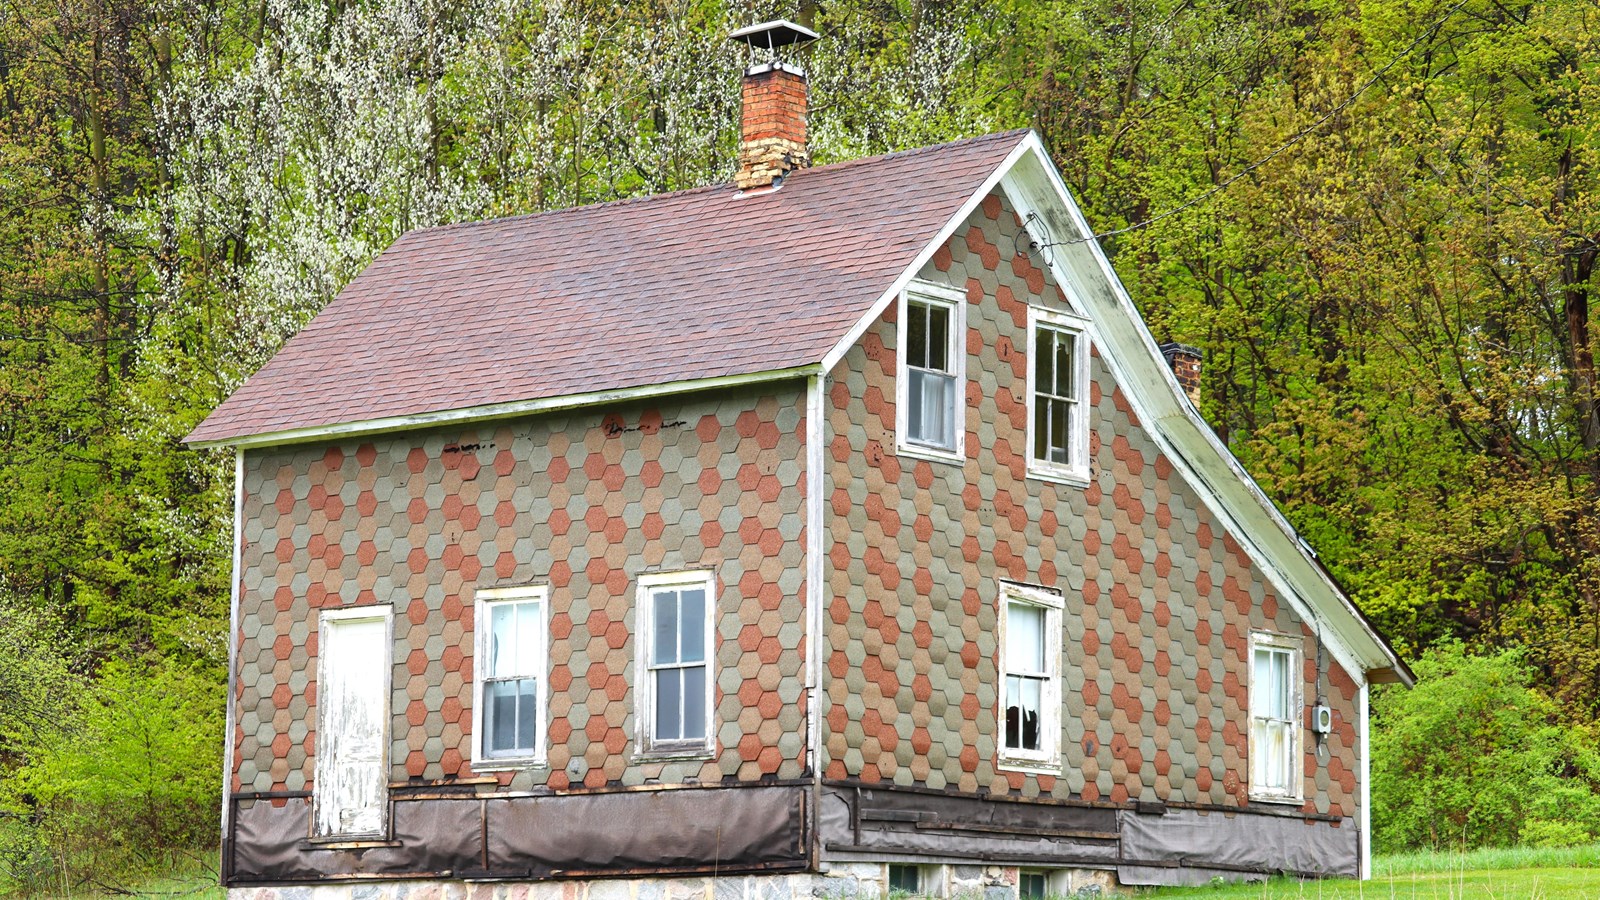 An old house with colorful octagonal siding, sitting on a stone foundation.